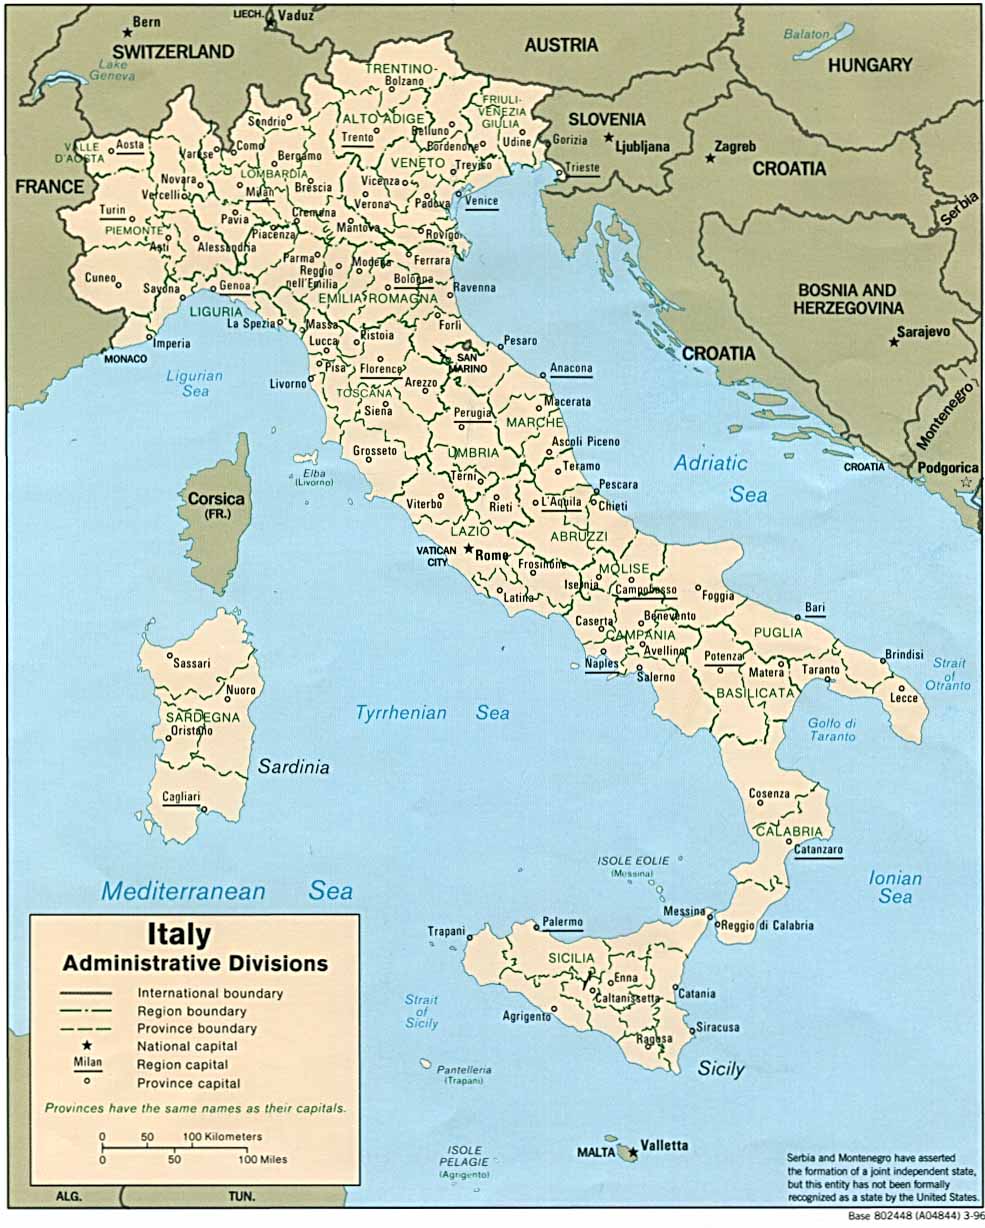 Italy Maps - Perry-Castañeda Map Collection - UT Library Online